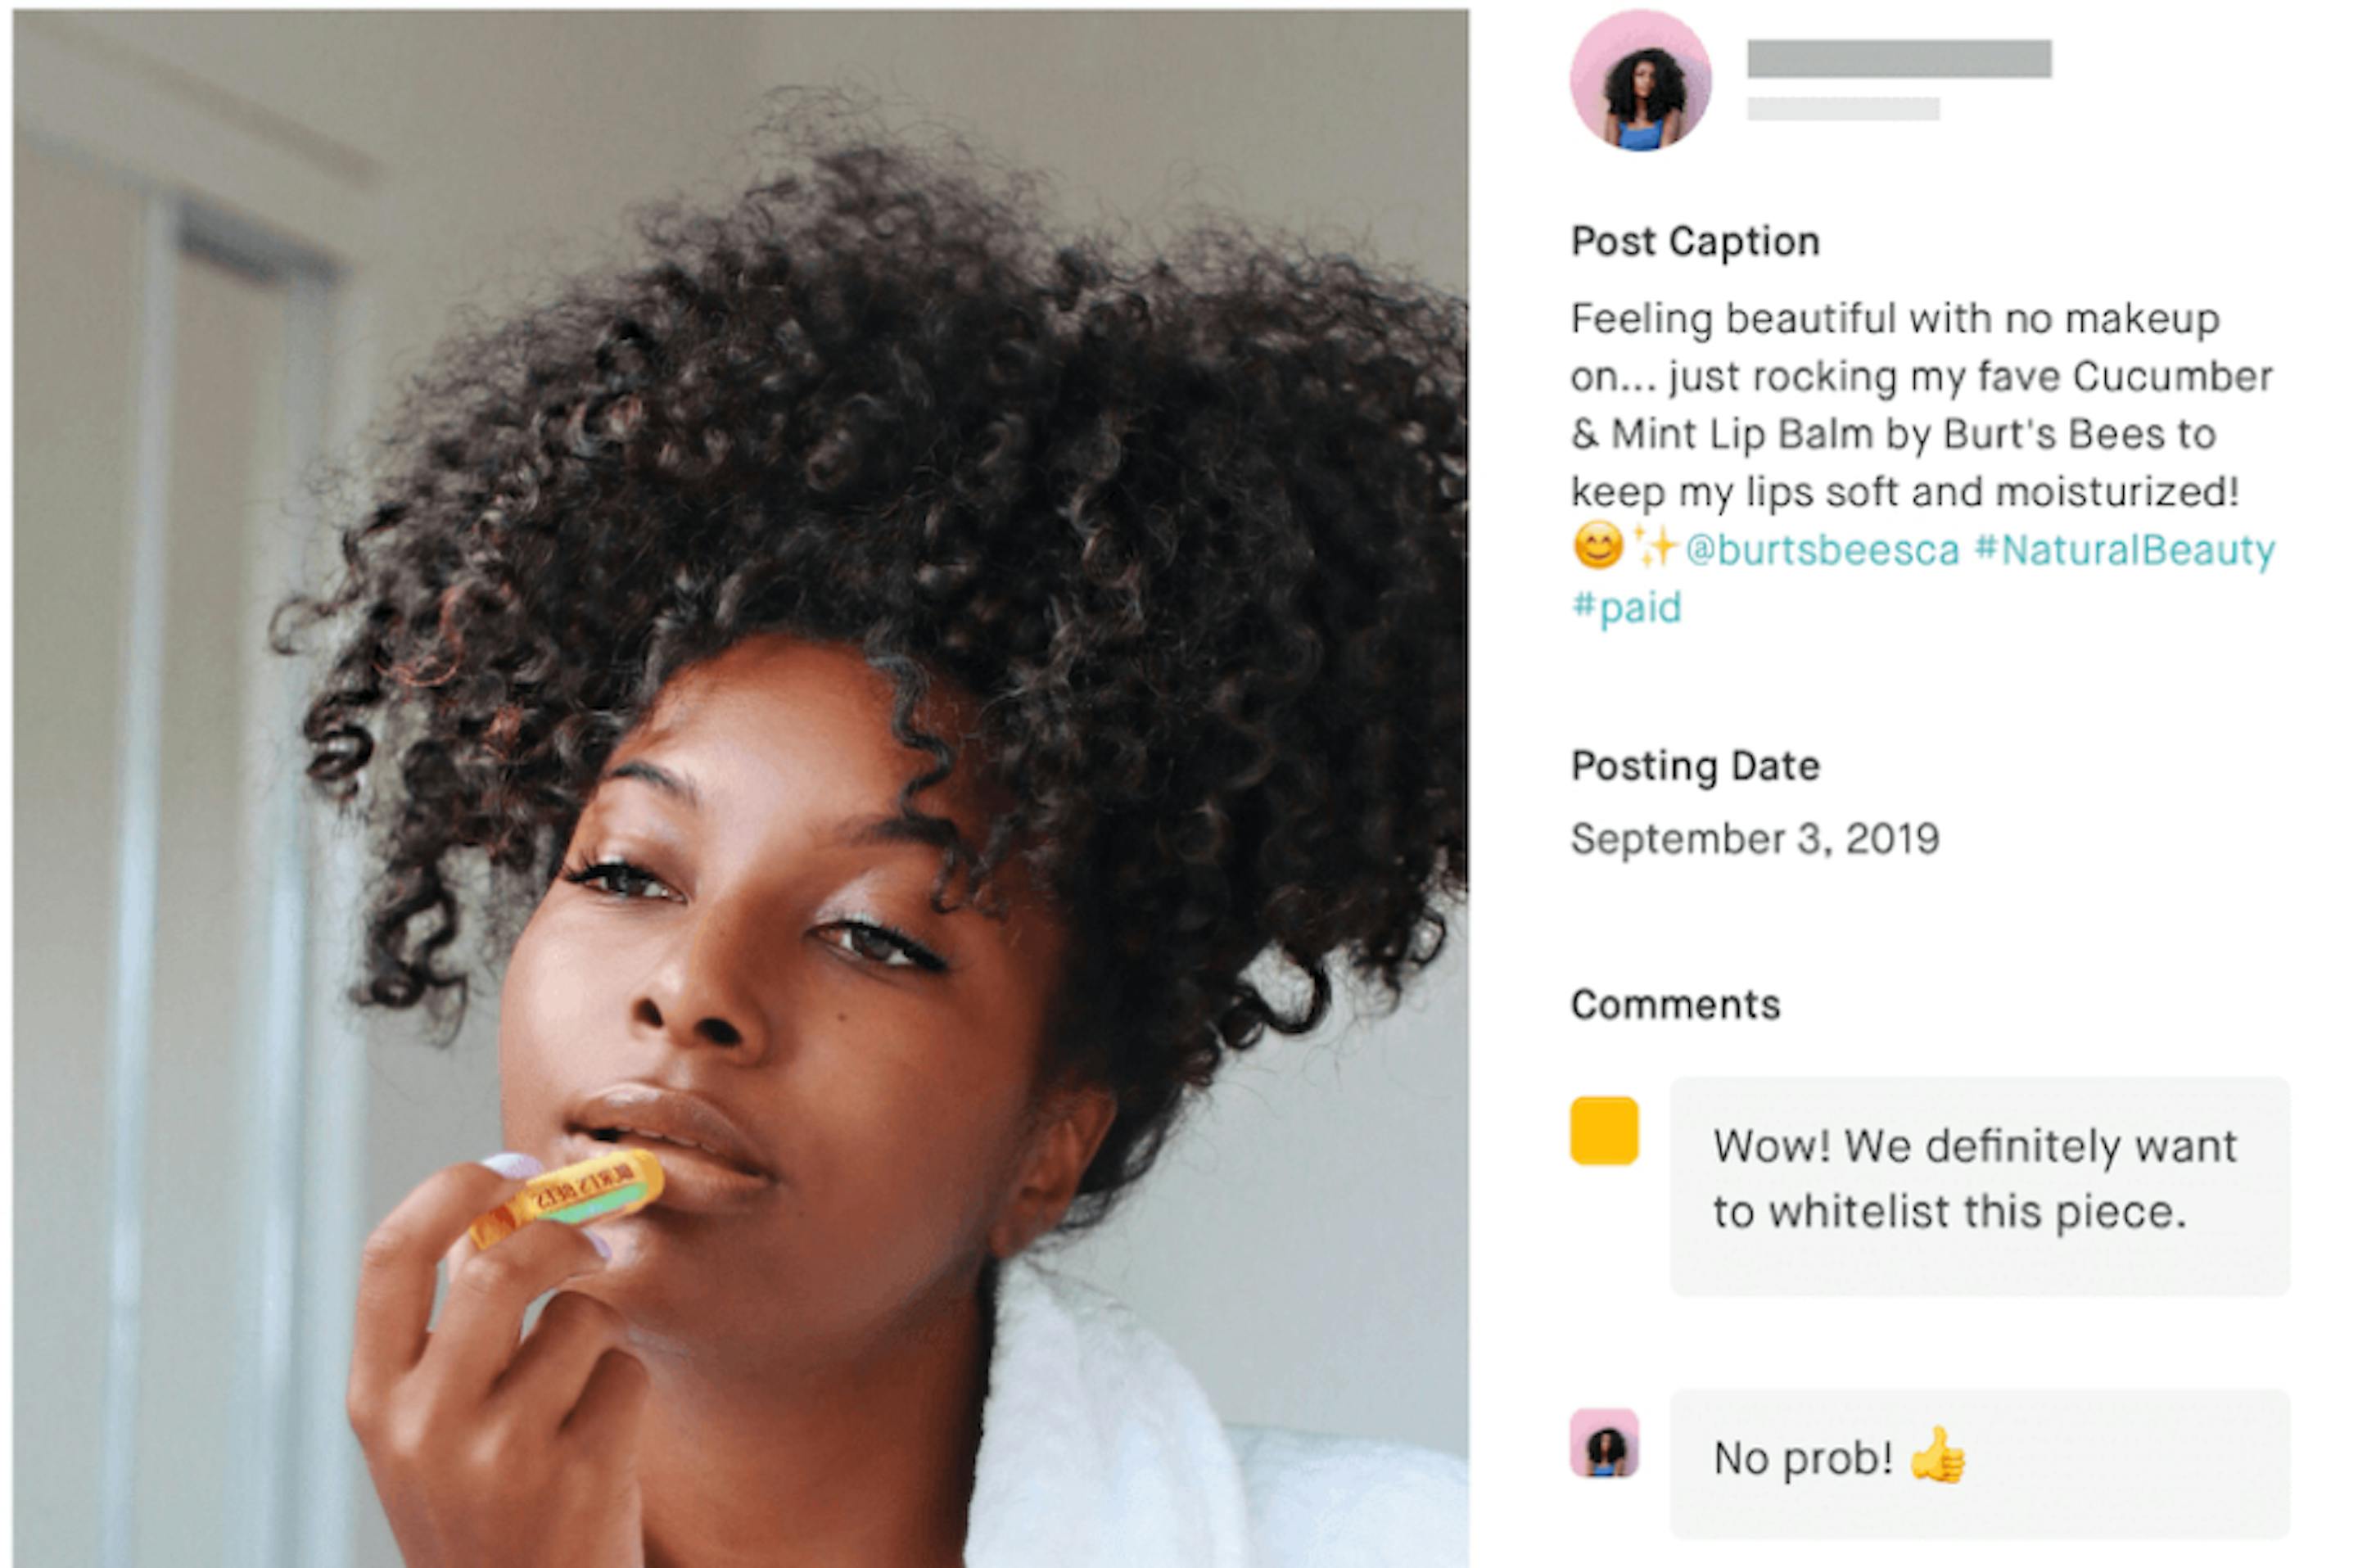 Instagram interface showing woman applying chap stick to lips